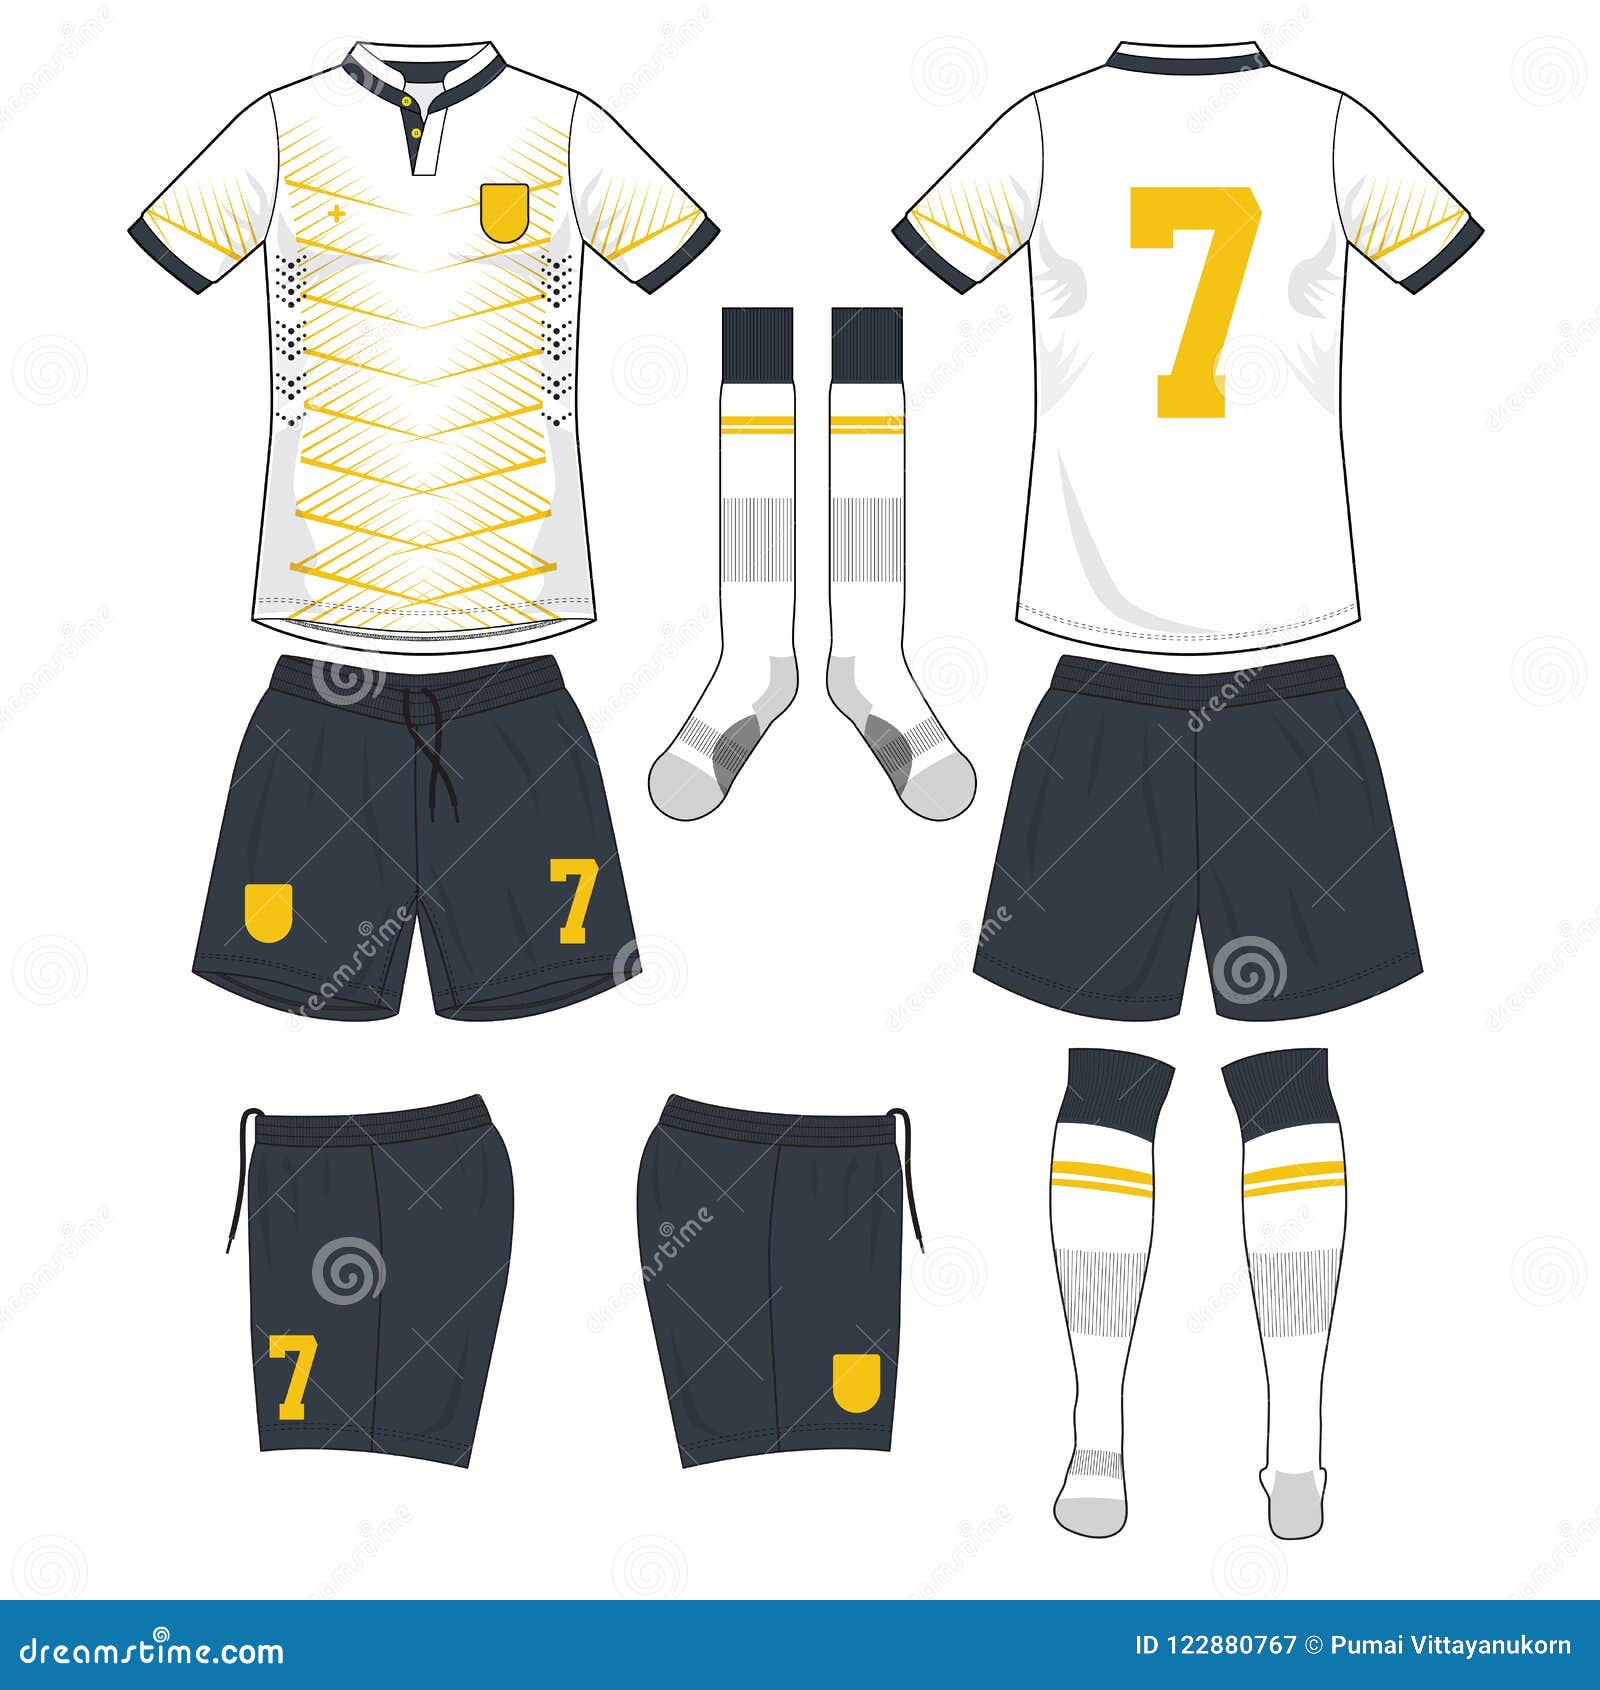 white and yellow jersey